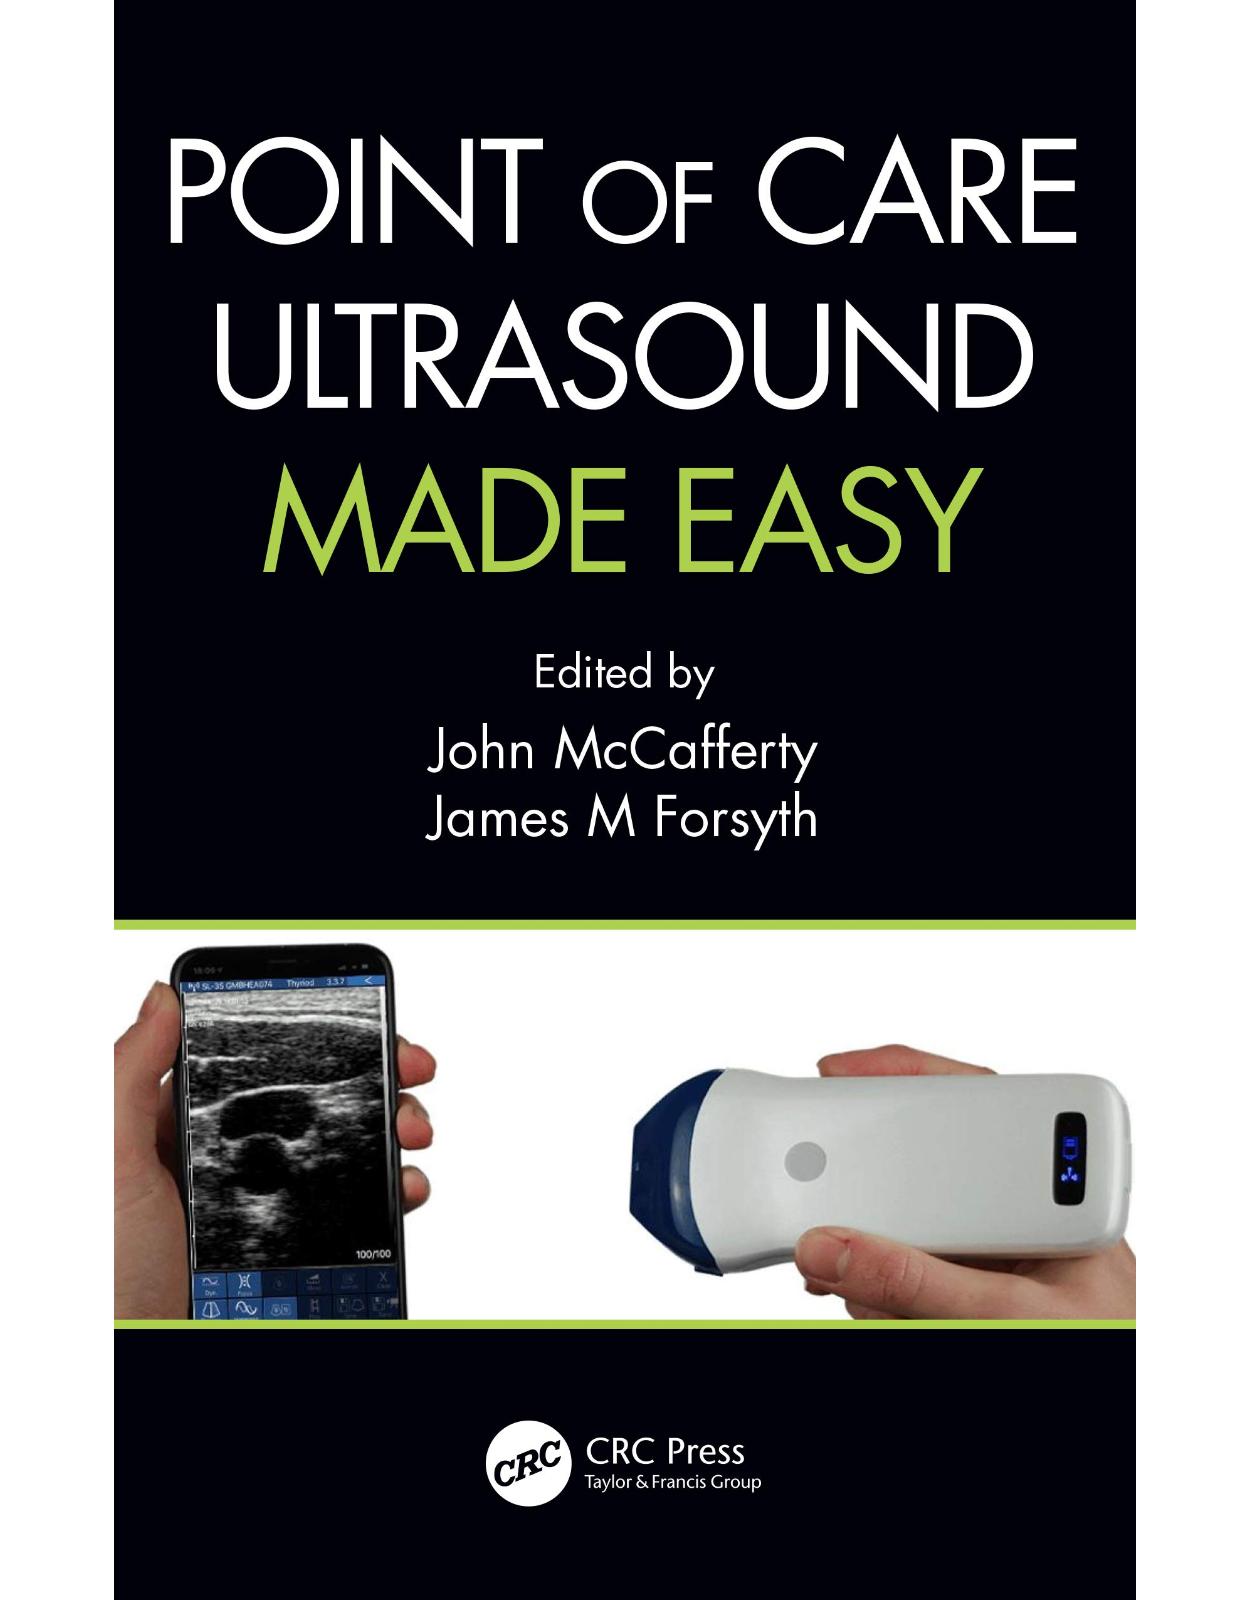 Point of Care Ultrasound Made Easy